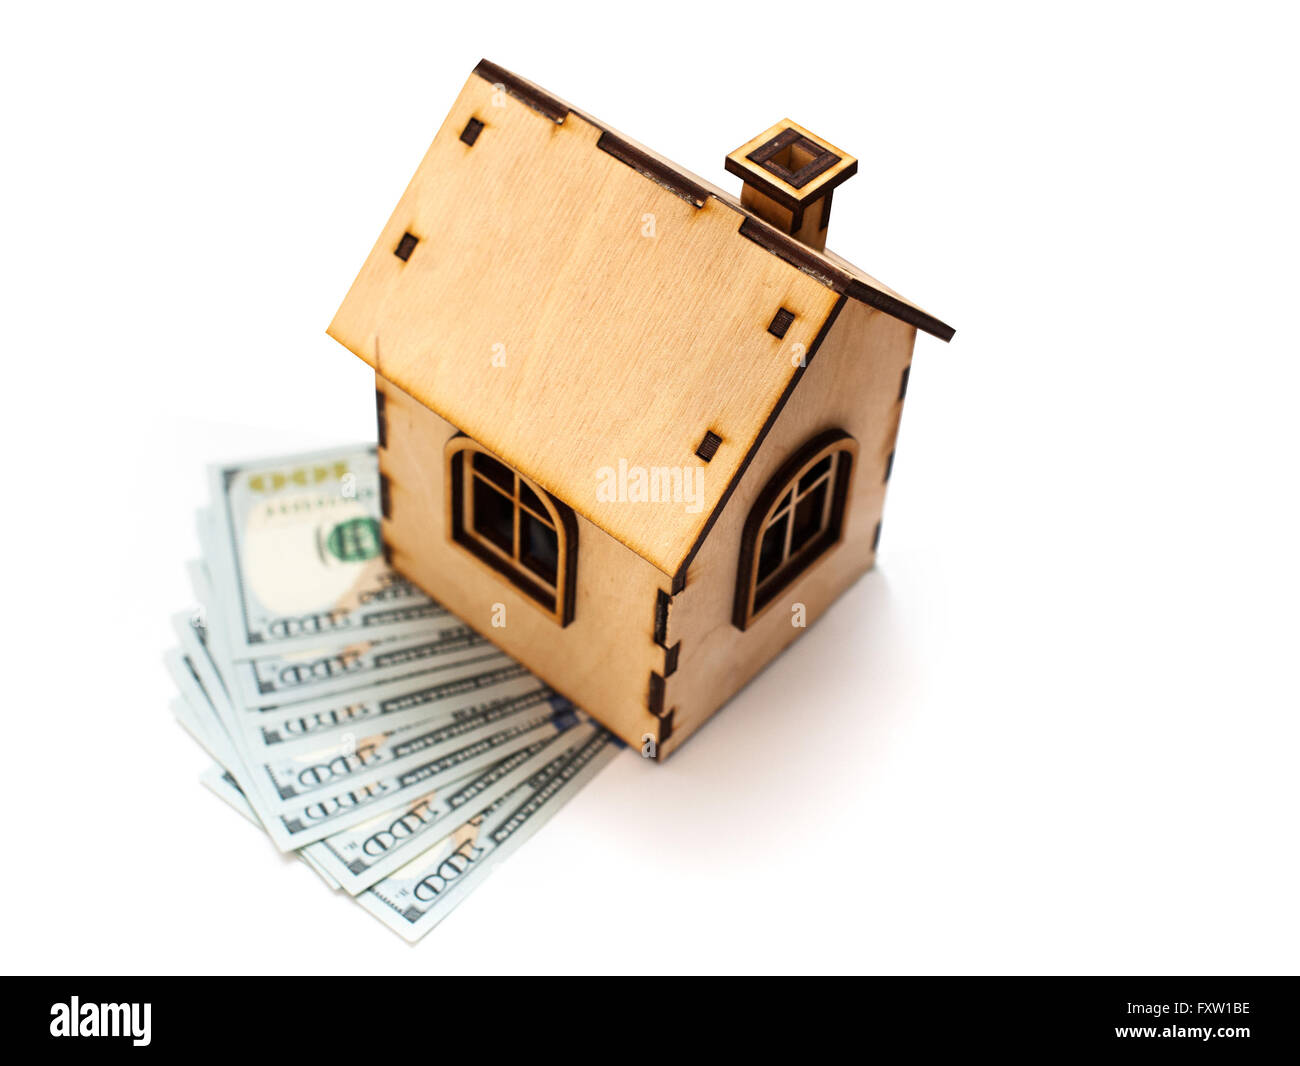 House shape made of wooden blocks and currencies dollar lying on electrical construction Stock Photo